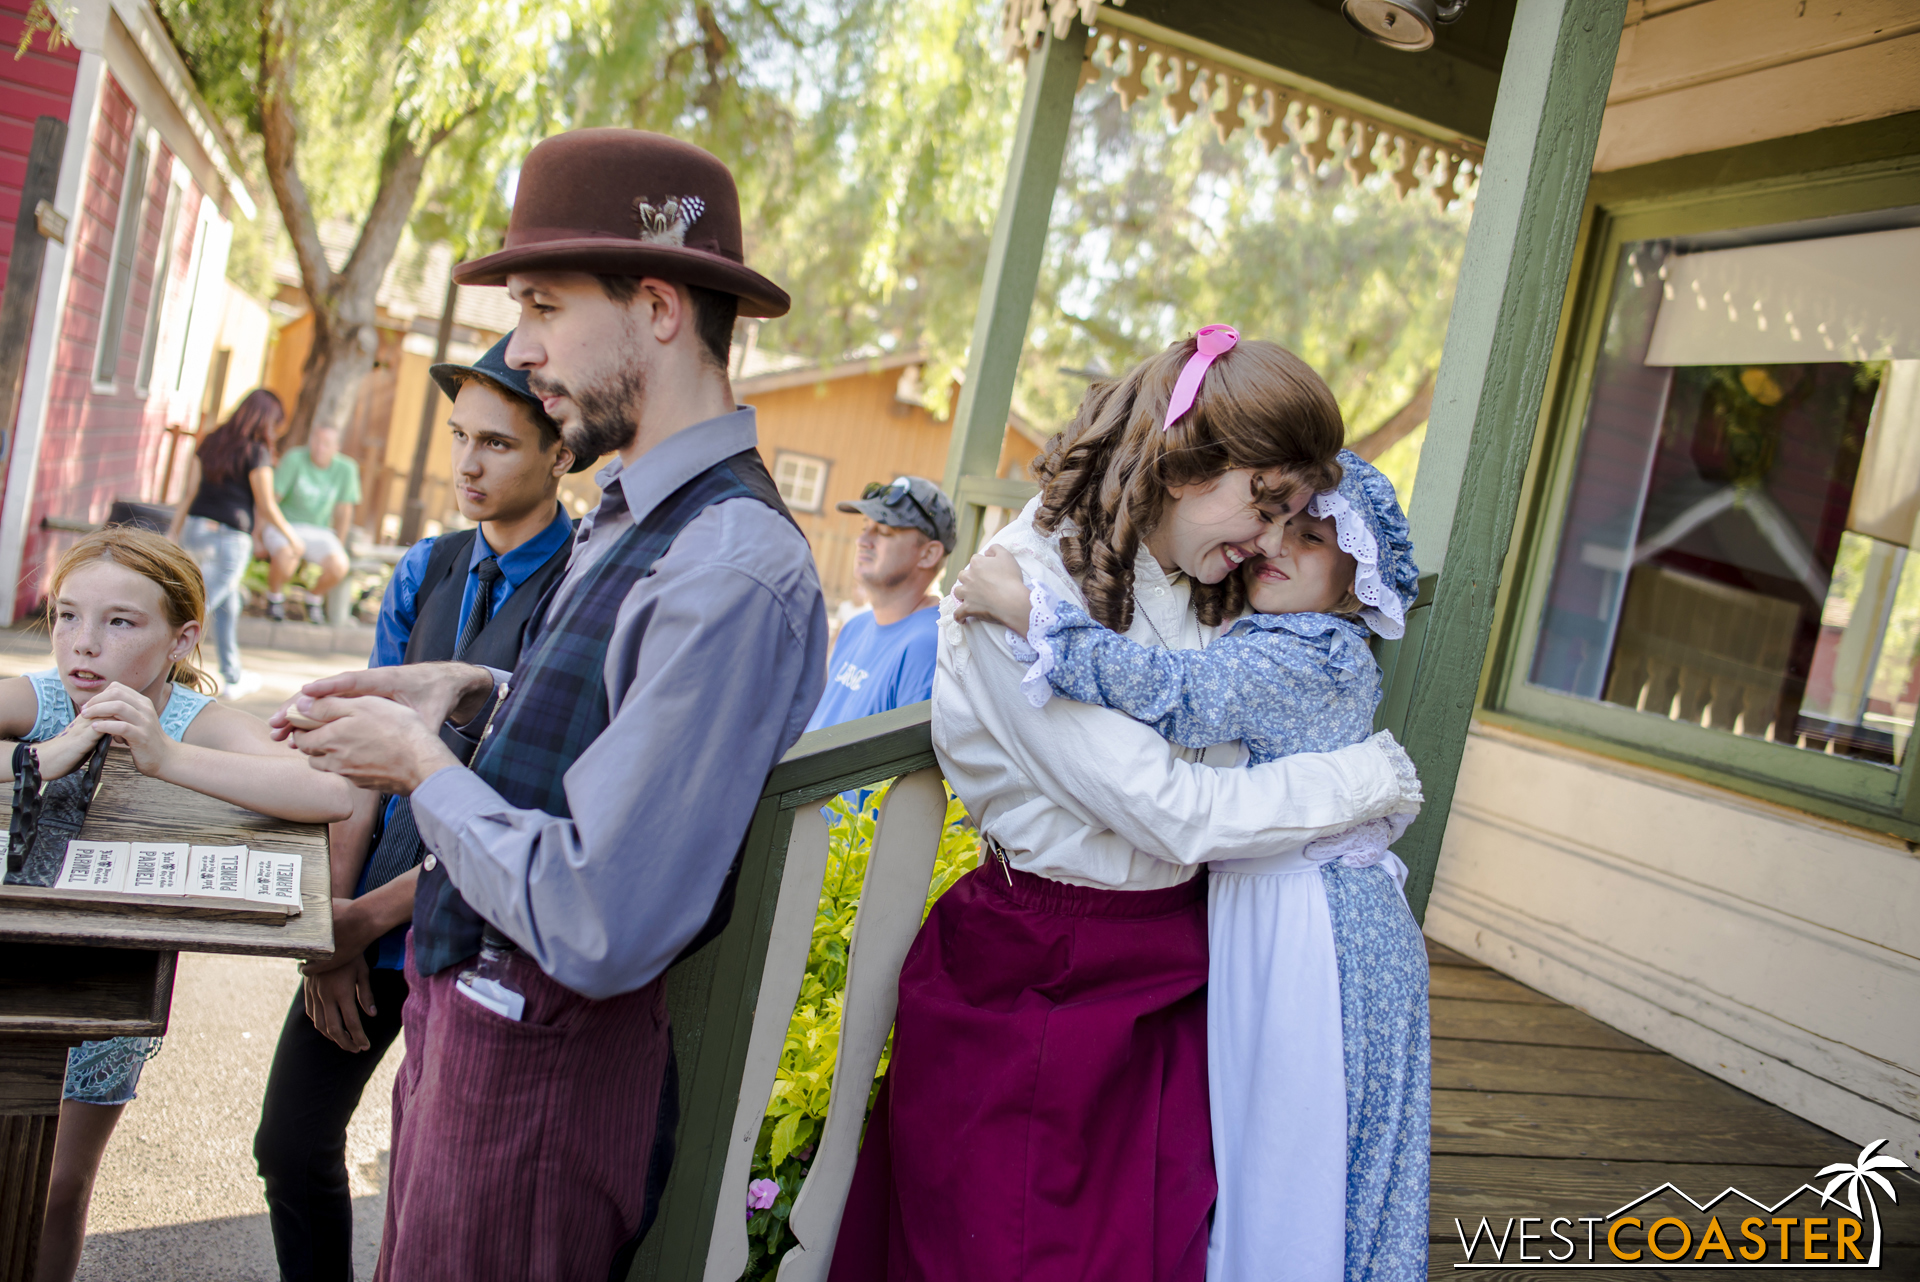  One of many beautiful moments at Ghost Town Alive!, Chelsea gives a young town citizen a hug.&nbsp; For many kids, Ghost Town Alive! has been a magical experience of live theater, and they have returned on multiple occasions to engage in the product